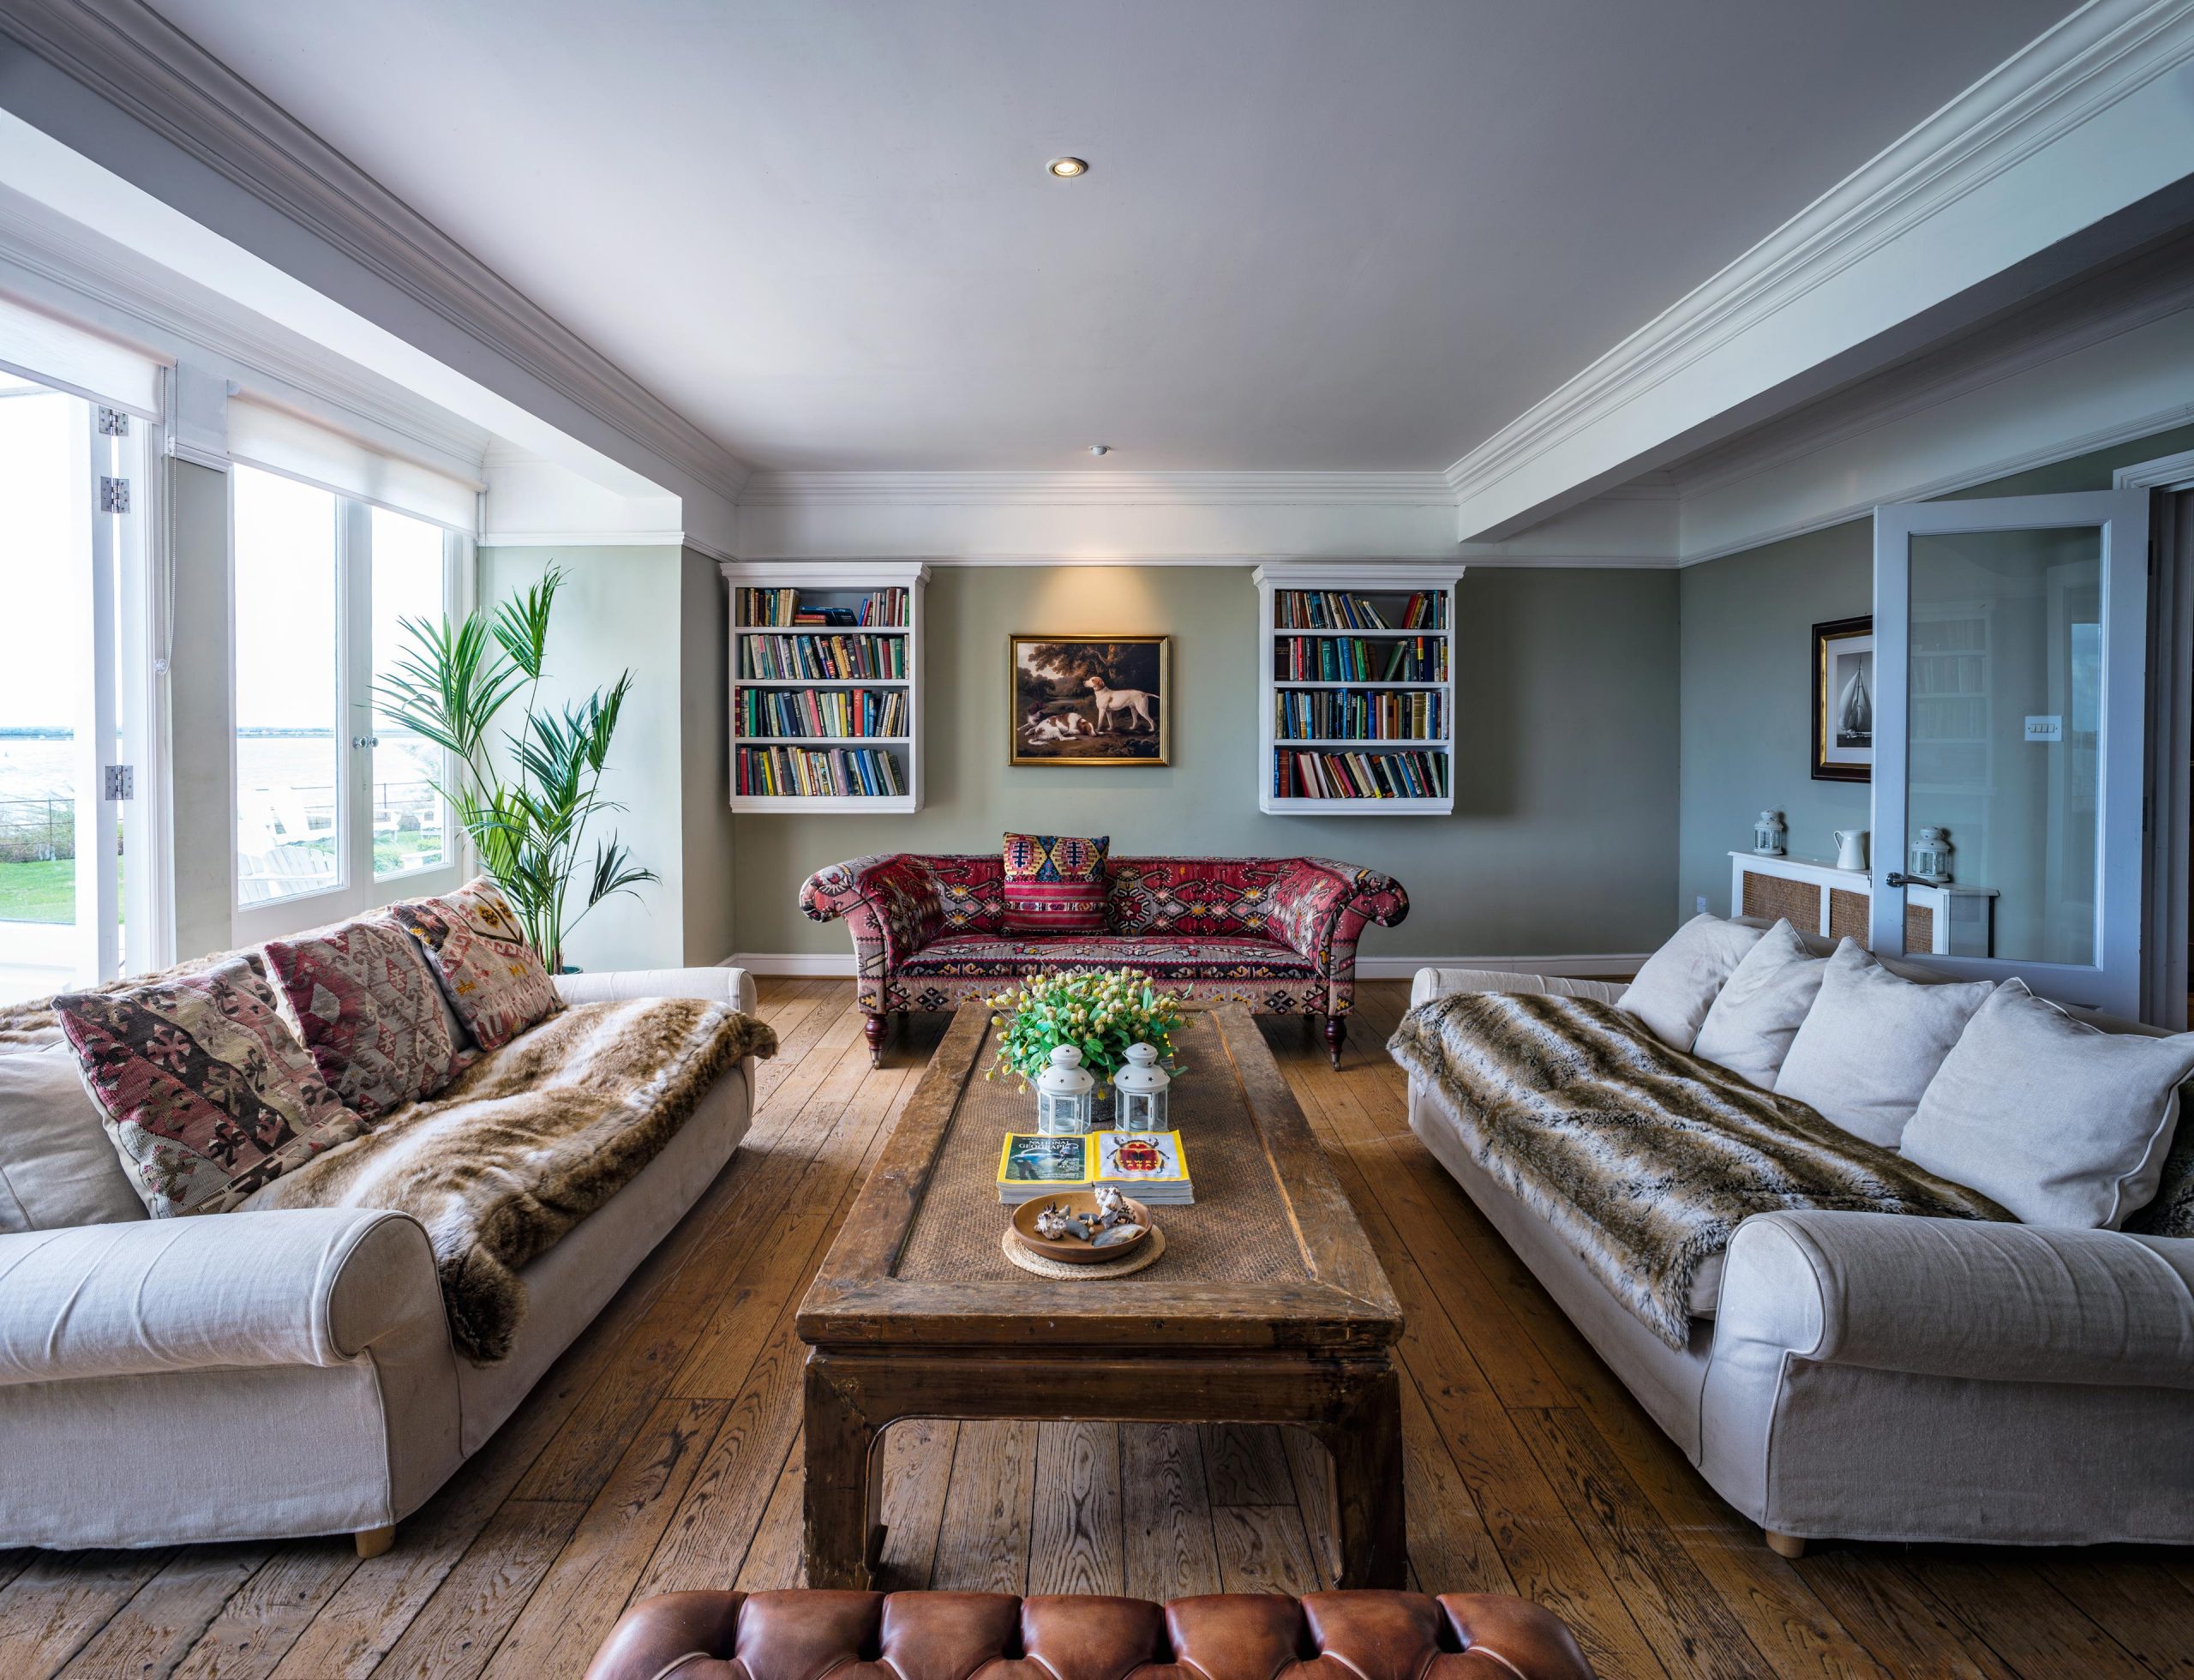 Inviting image of a cottage's spacious living room captured by Wright Content for an Airbnb rental on the outskirts of London. Large comfortable sofas, bookshelves, and a window overlooking a private beach create a cozy and relaxing atmosphere.